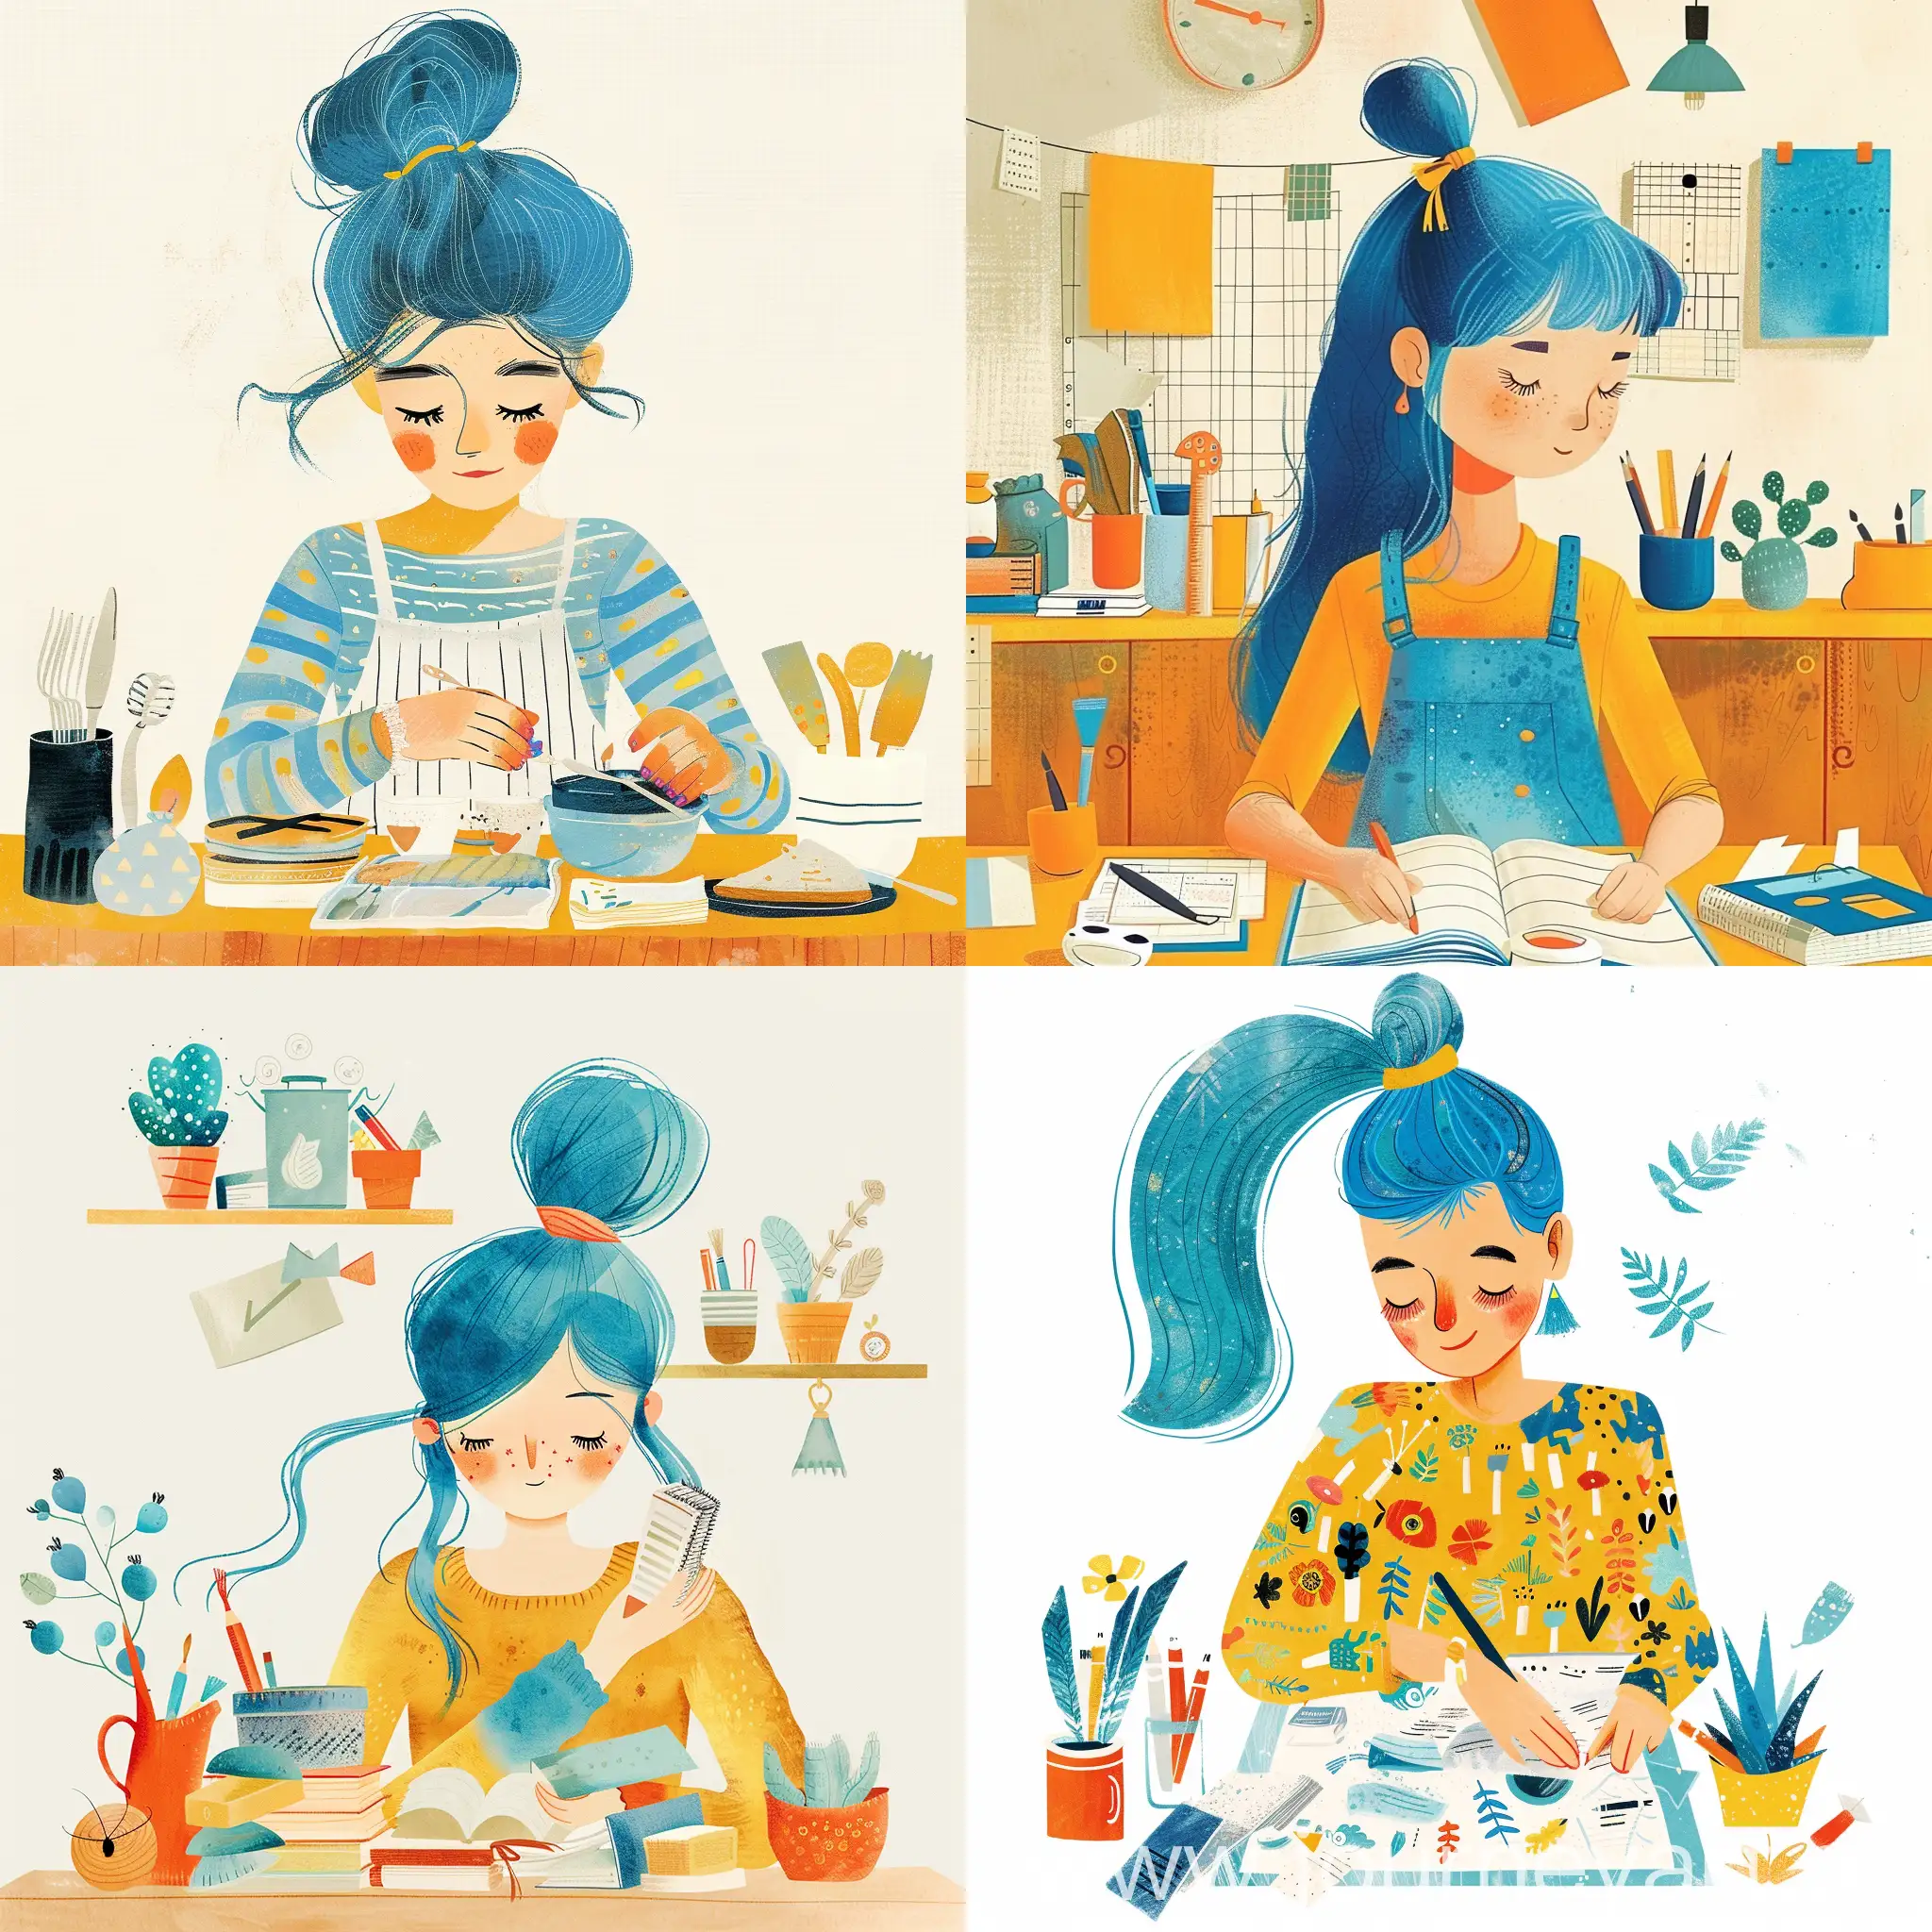 illustration of a gwoman with blue hair who is working onm tasks, children’s book illustration, whimsical and simple illustration aesthetic, bright colors, in the style of Clémence Guillemaud